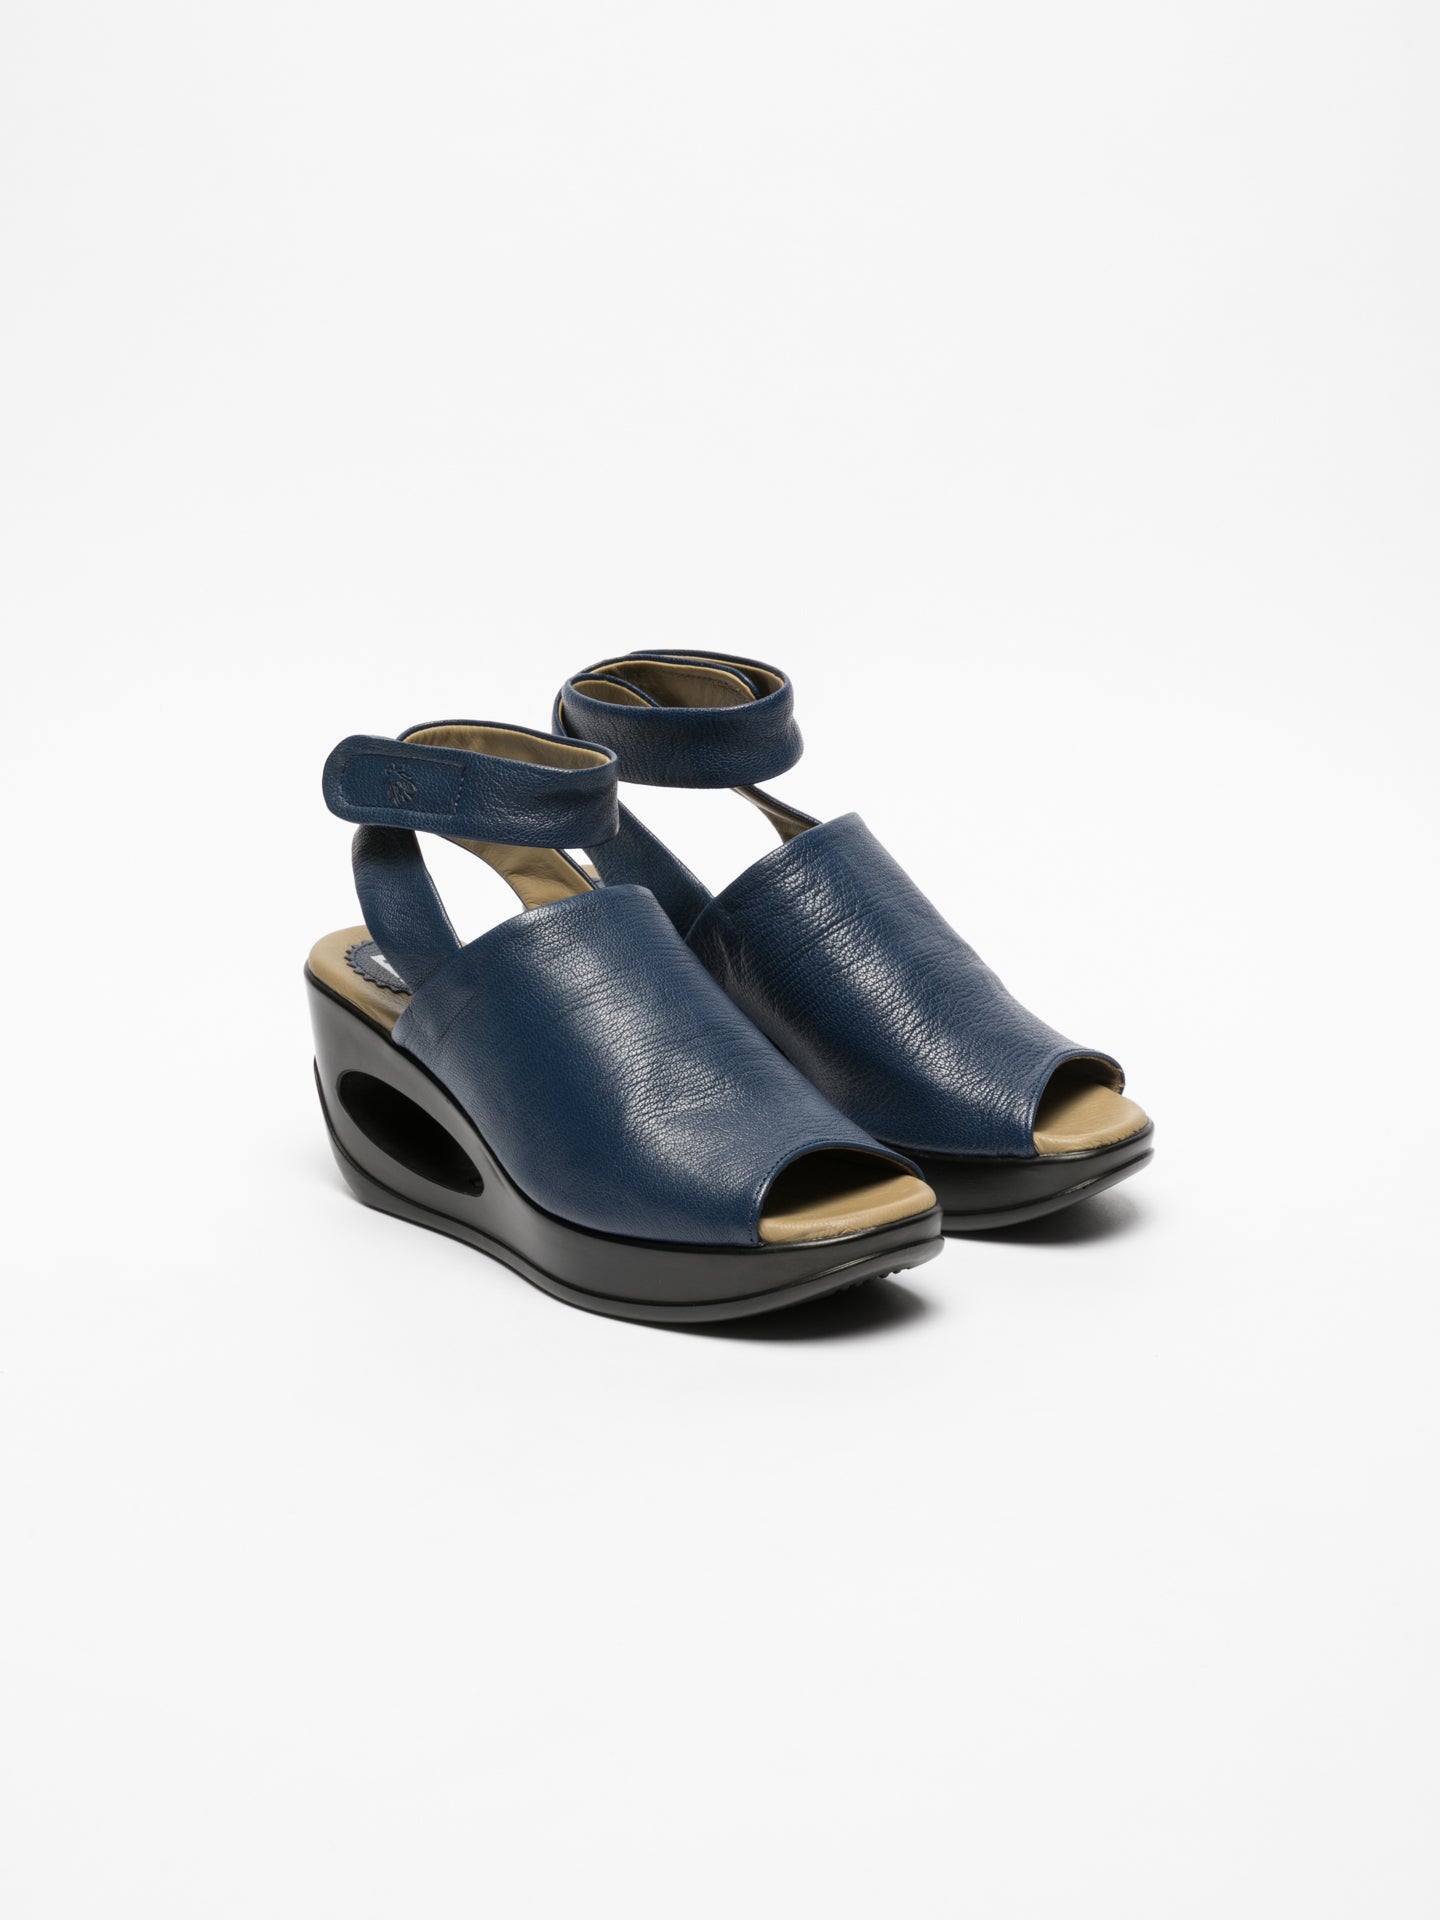 Fly London Blue Wedge Sandals